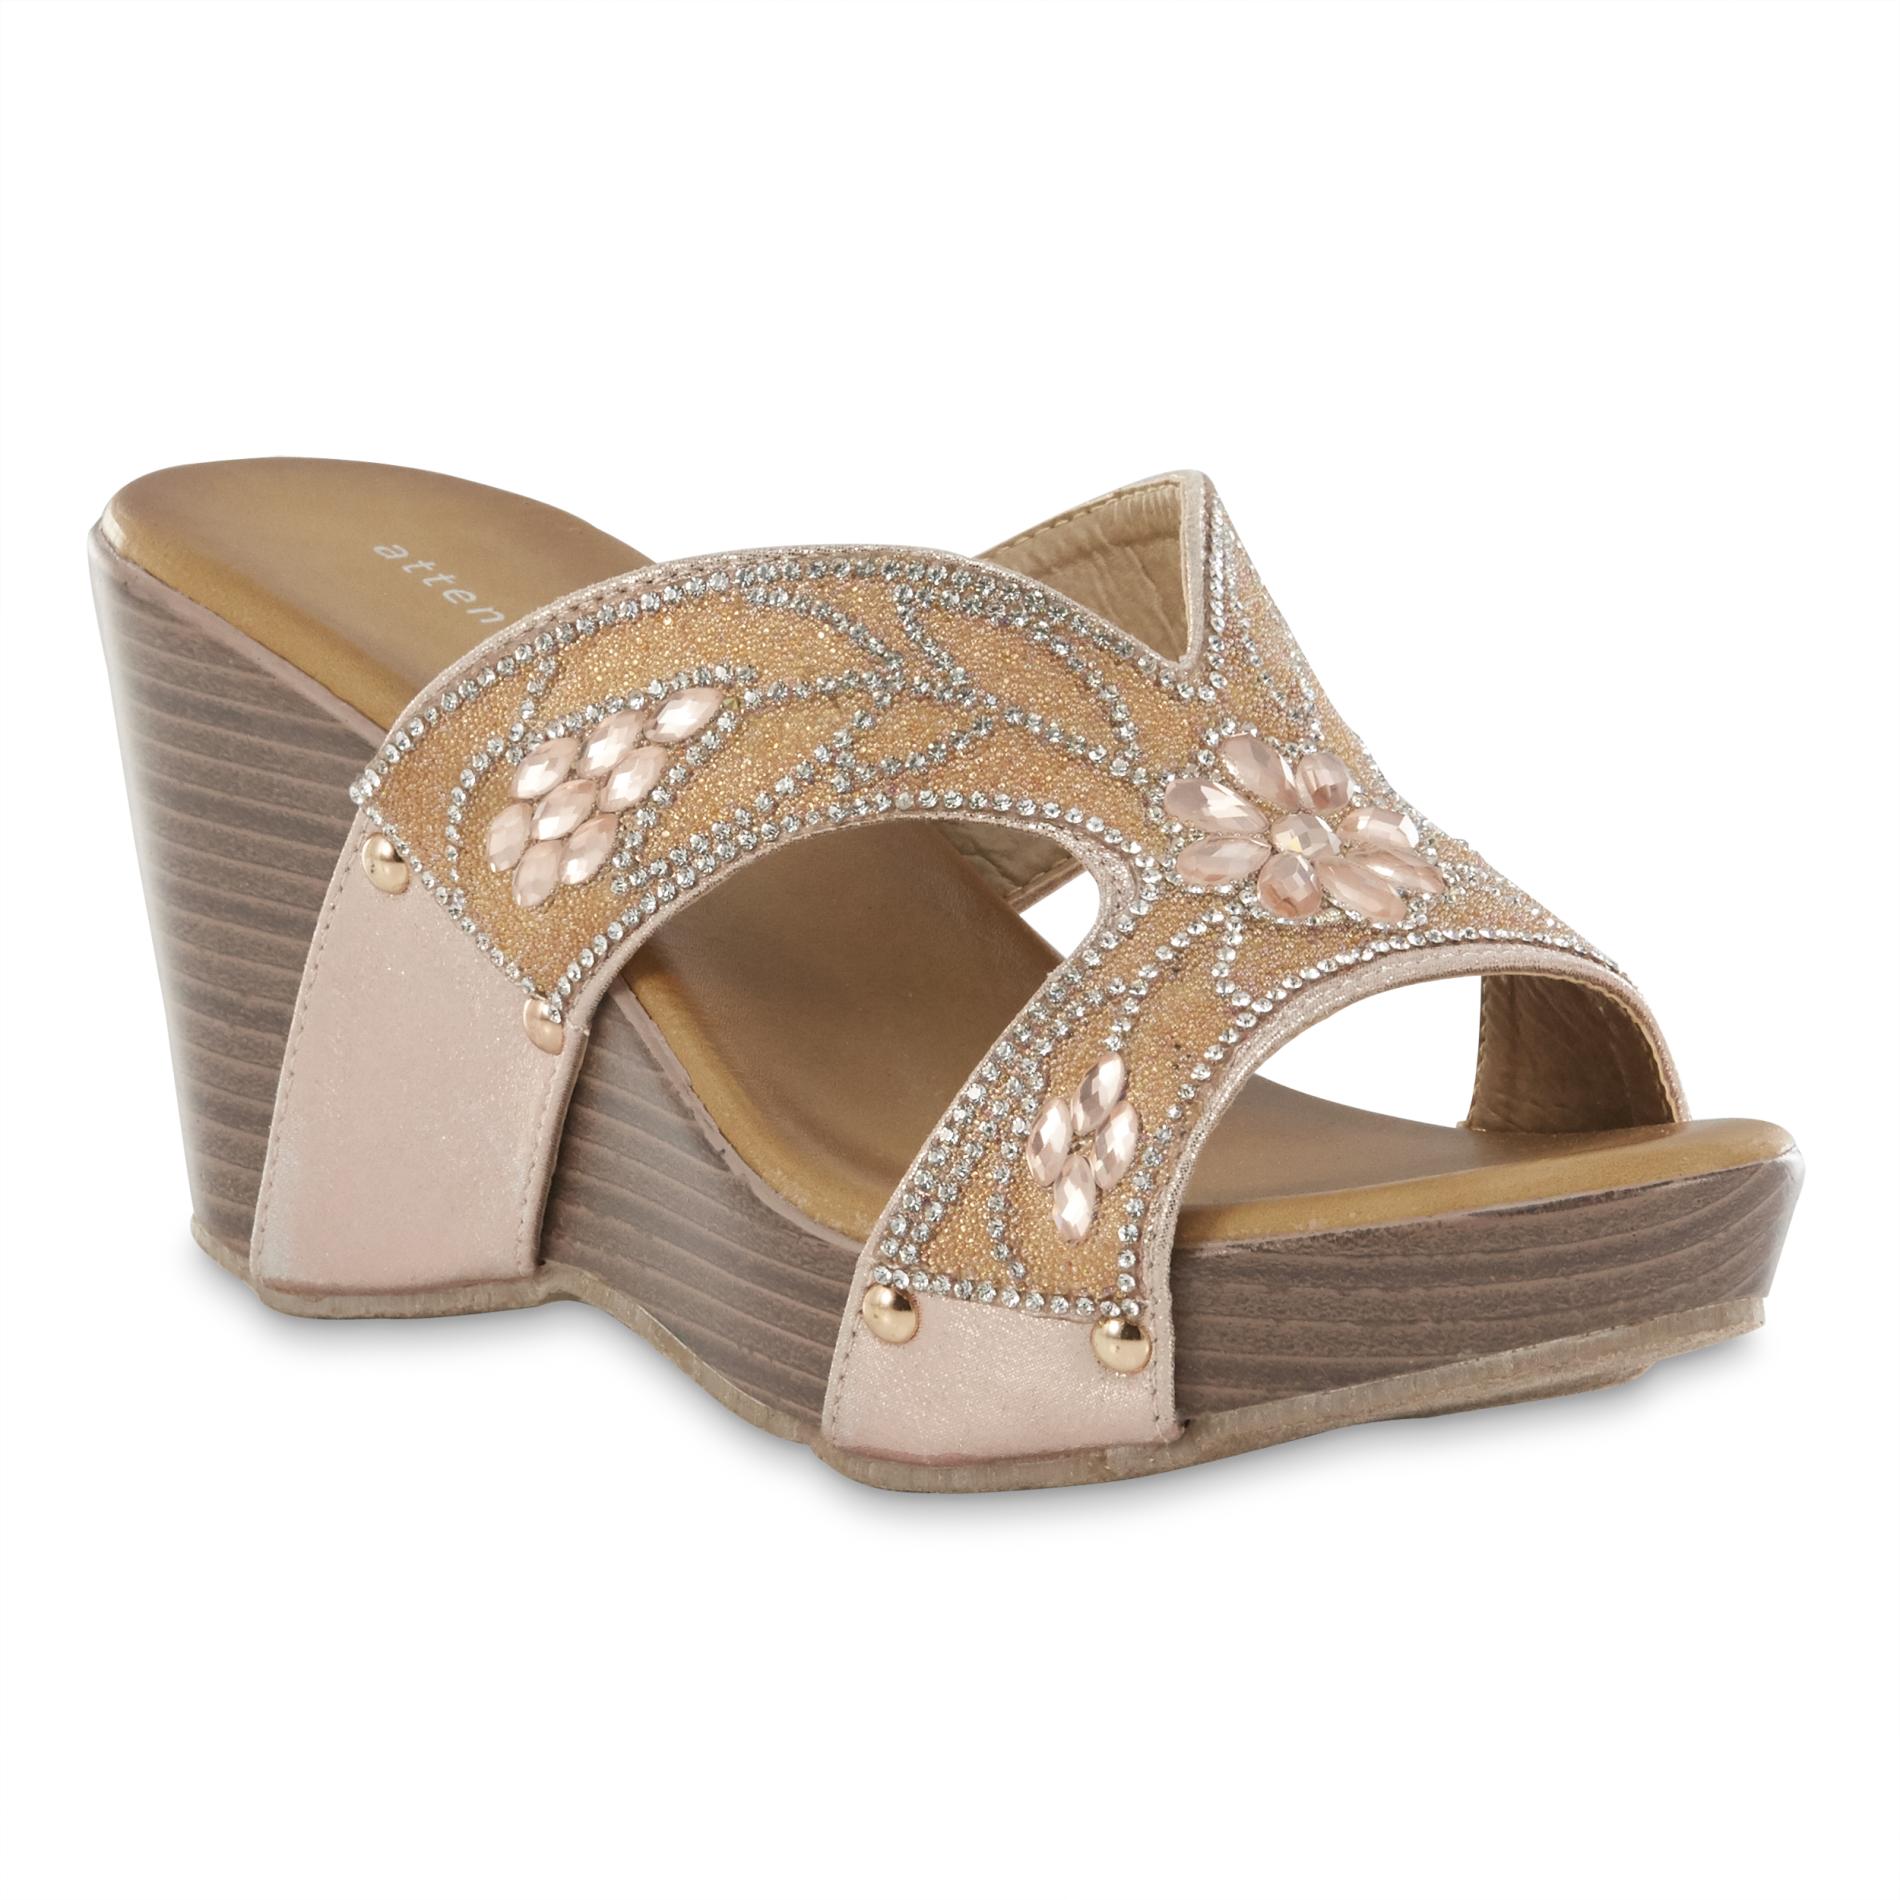 Attention Women's Ciara Champagne Wedge Sandal - Shoes - Women's Shoes ...